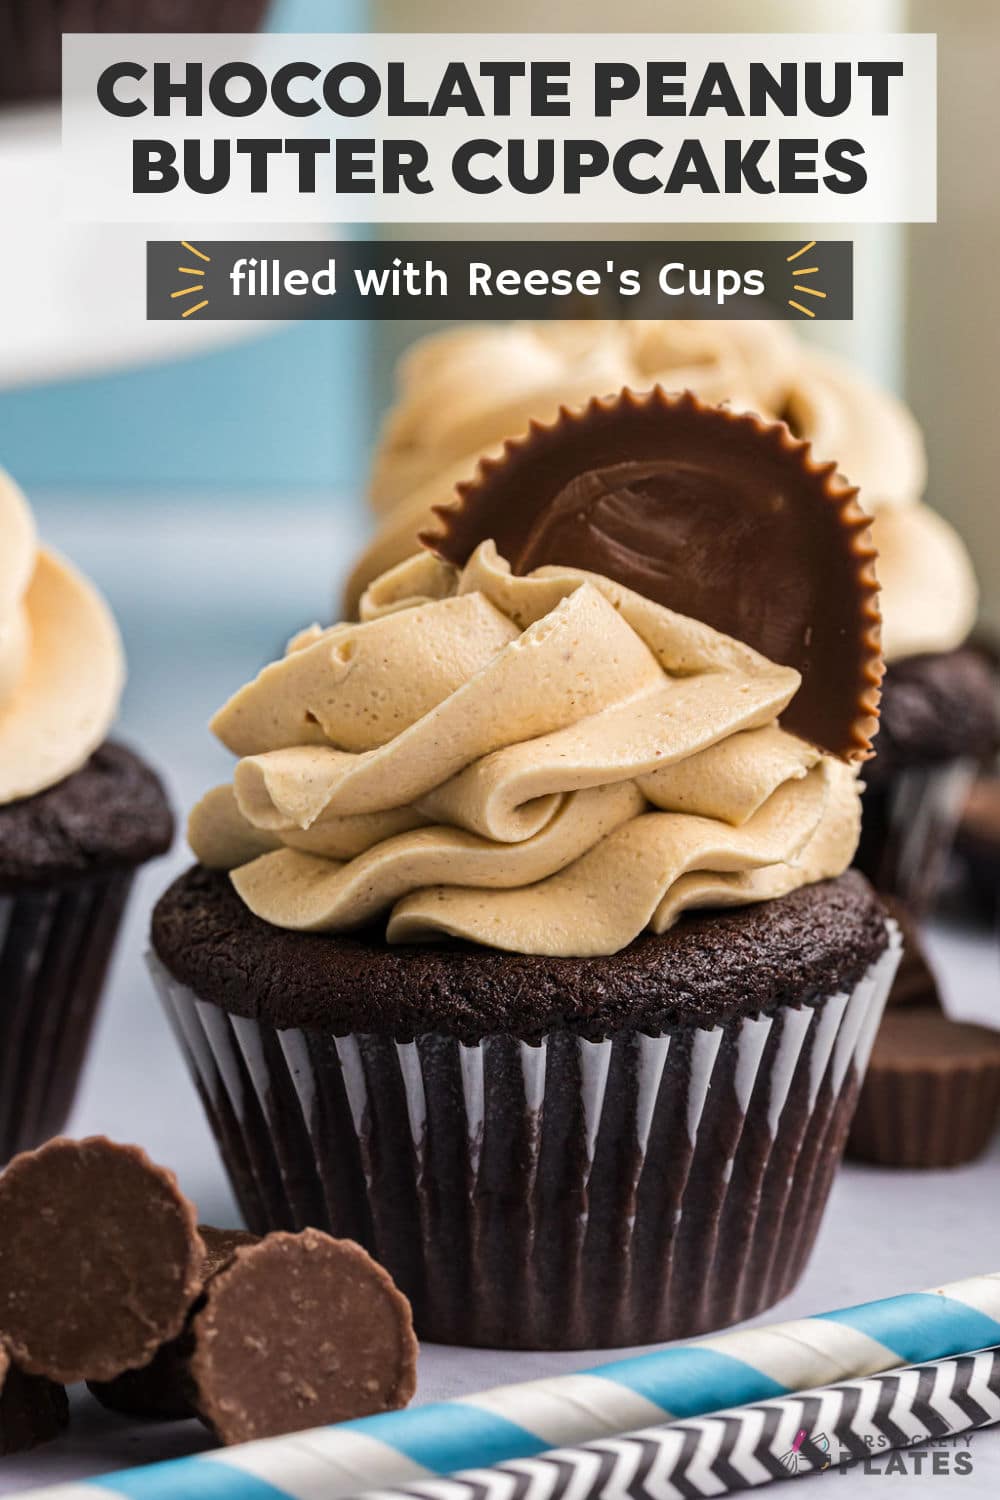 These Reese’s Stuffed Chocolate Cupcakes with Peanut Butter Frosting take dark chocolate cupcakes to another level. It doesn’t get any more decadent than a Reese’s peanut butter cup baked into the center of the cupcakes which are then topped with a creamy peanut butter frosting and garnished with a mini Reese. Chocolate cupcakes never tasted so good! | www.persnicketyplates.com